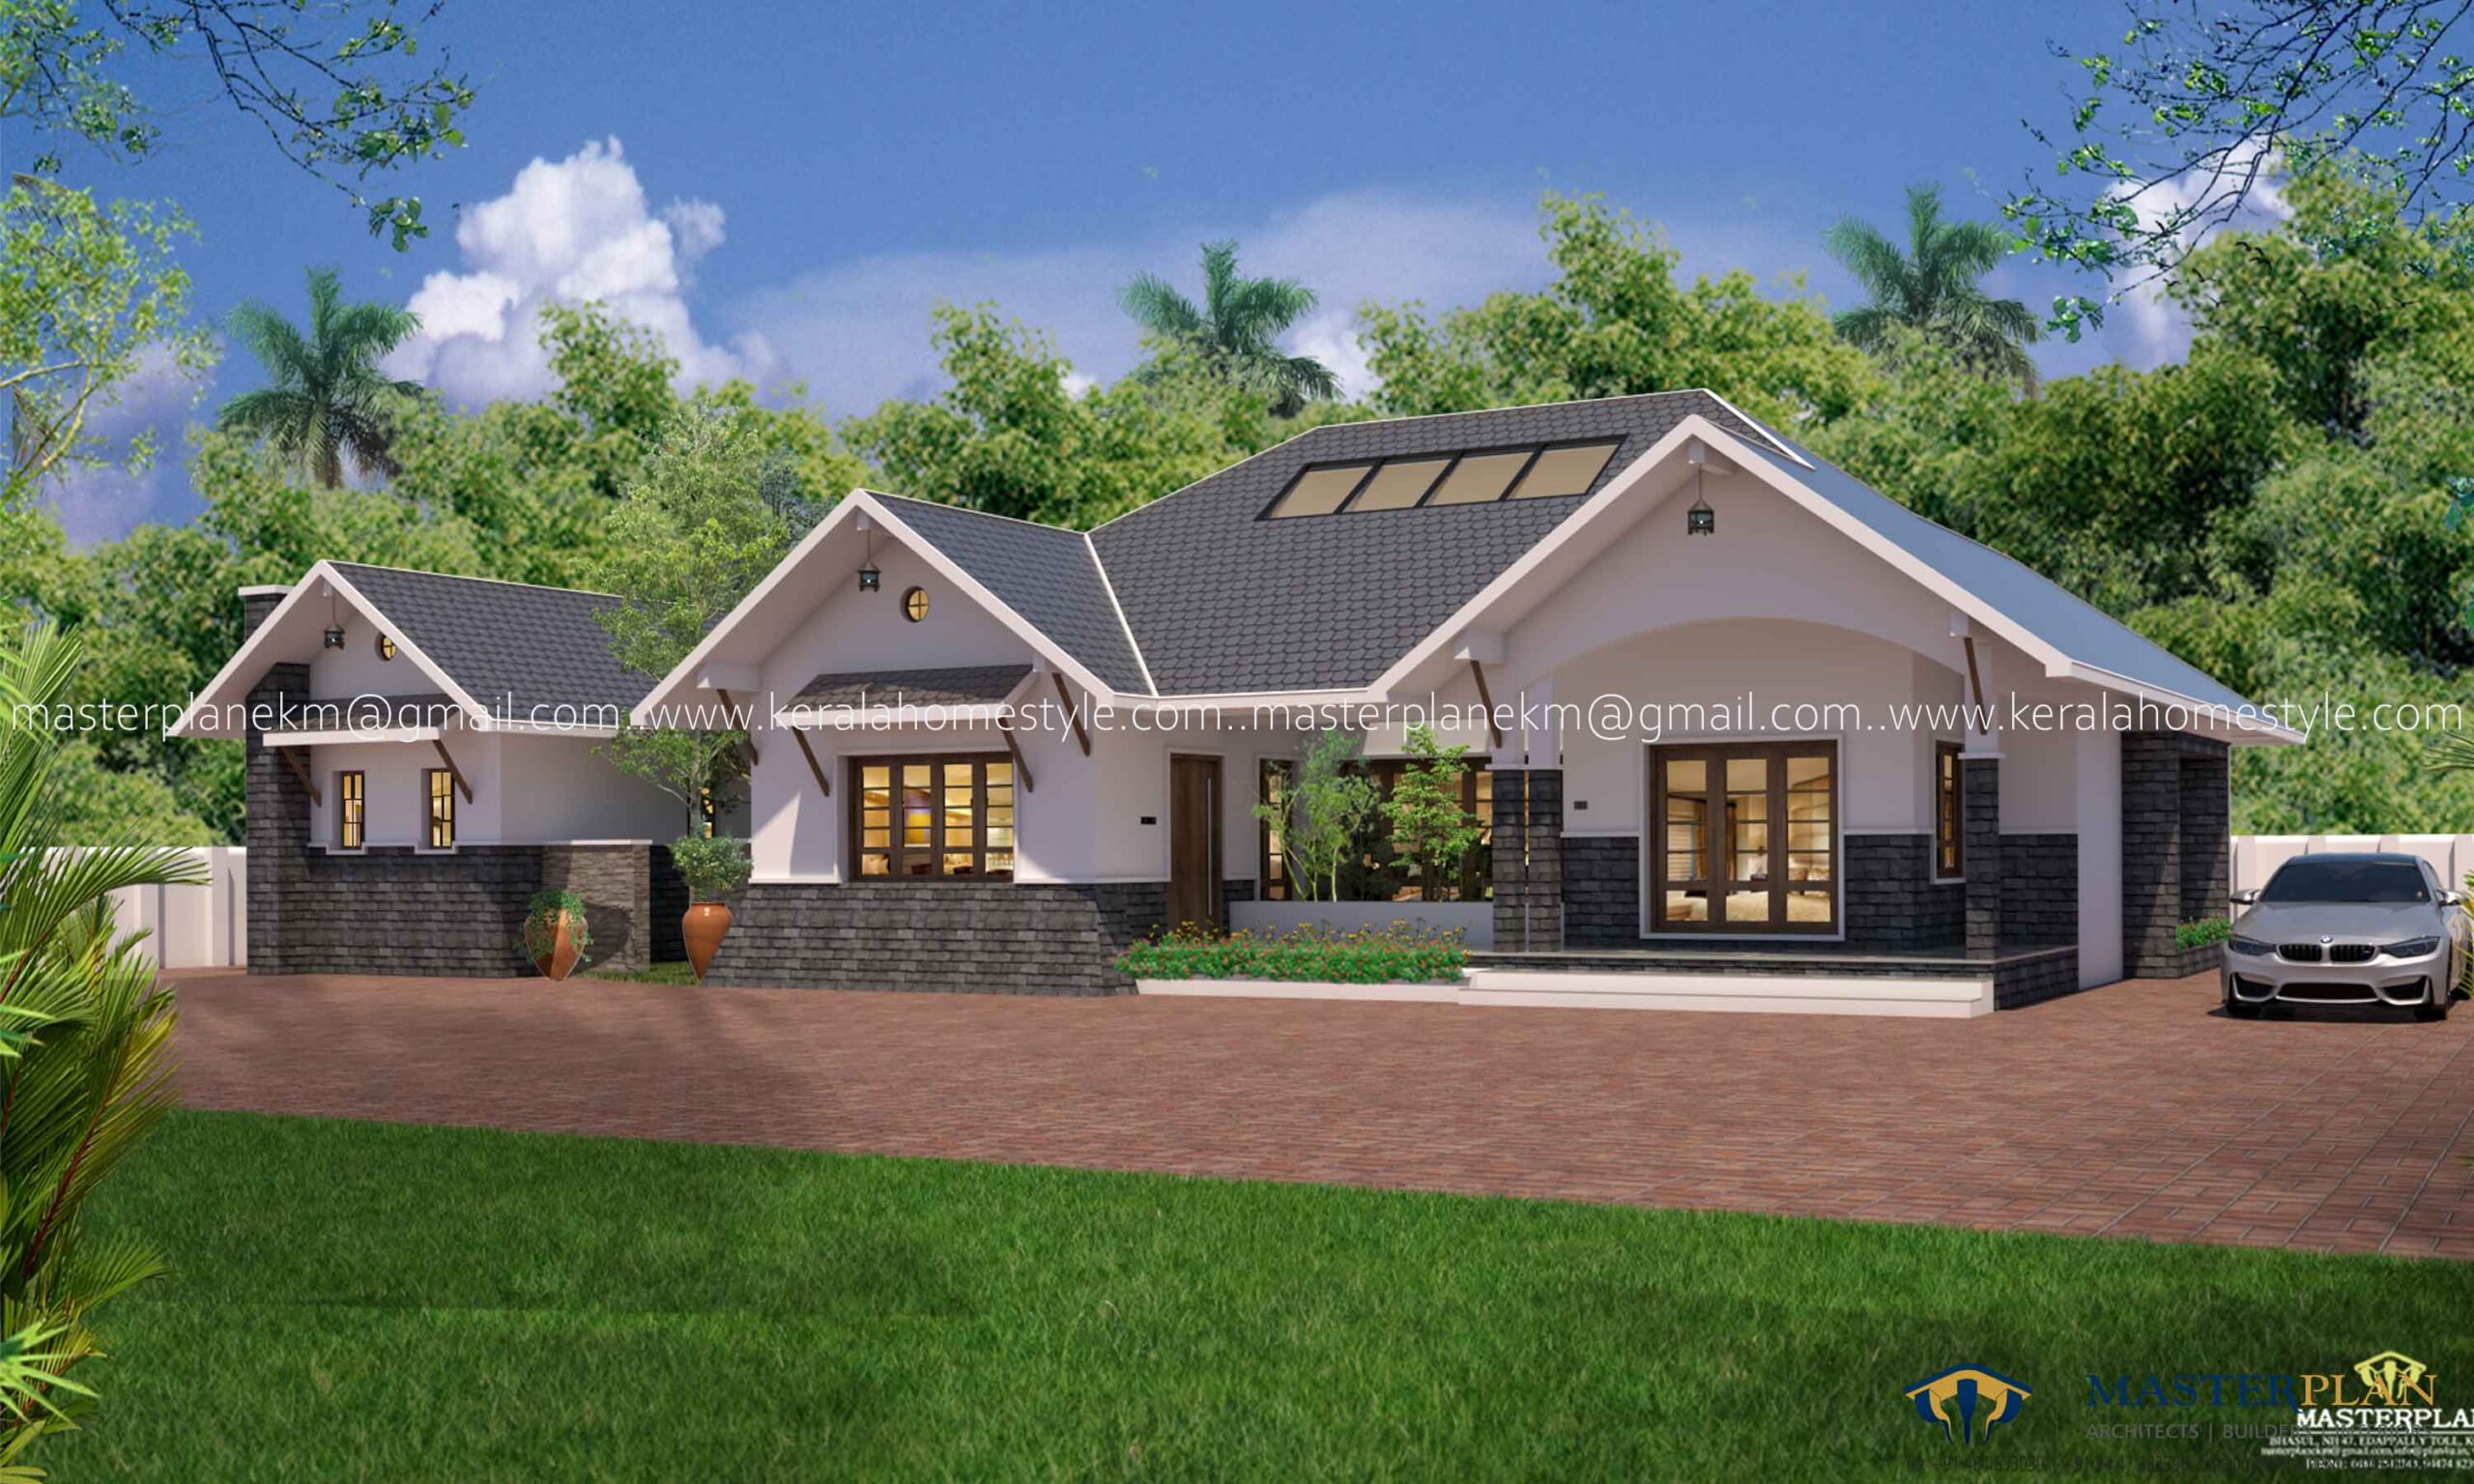 House Design 0025 Scaled 